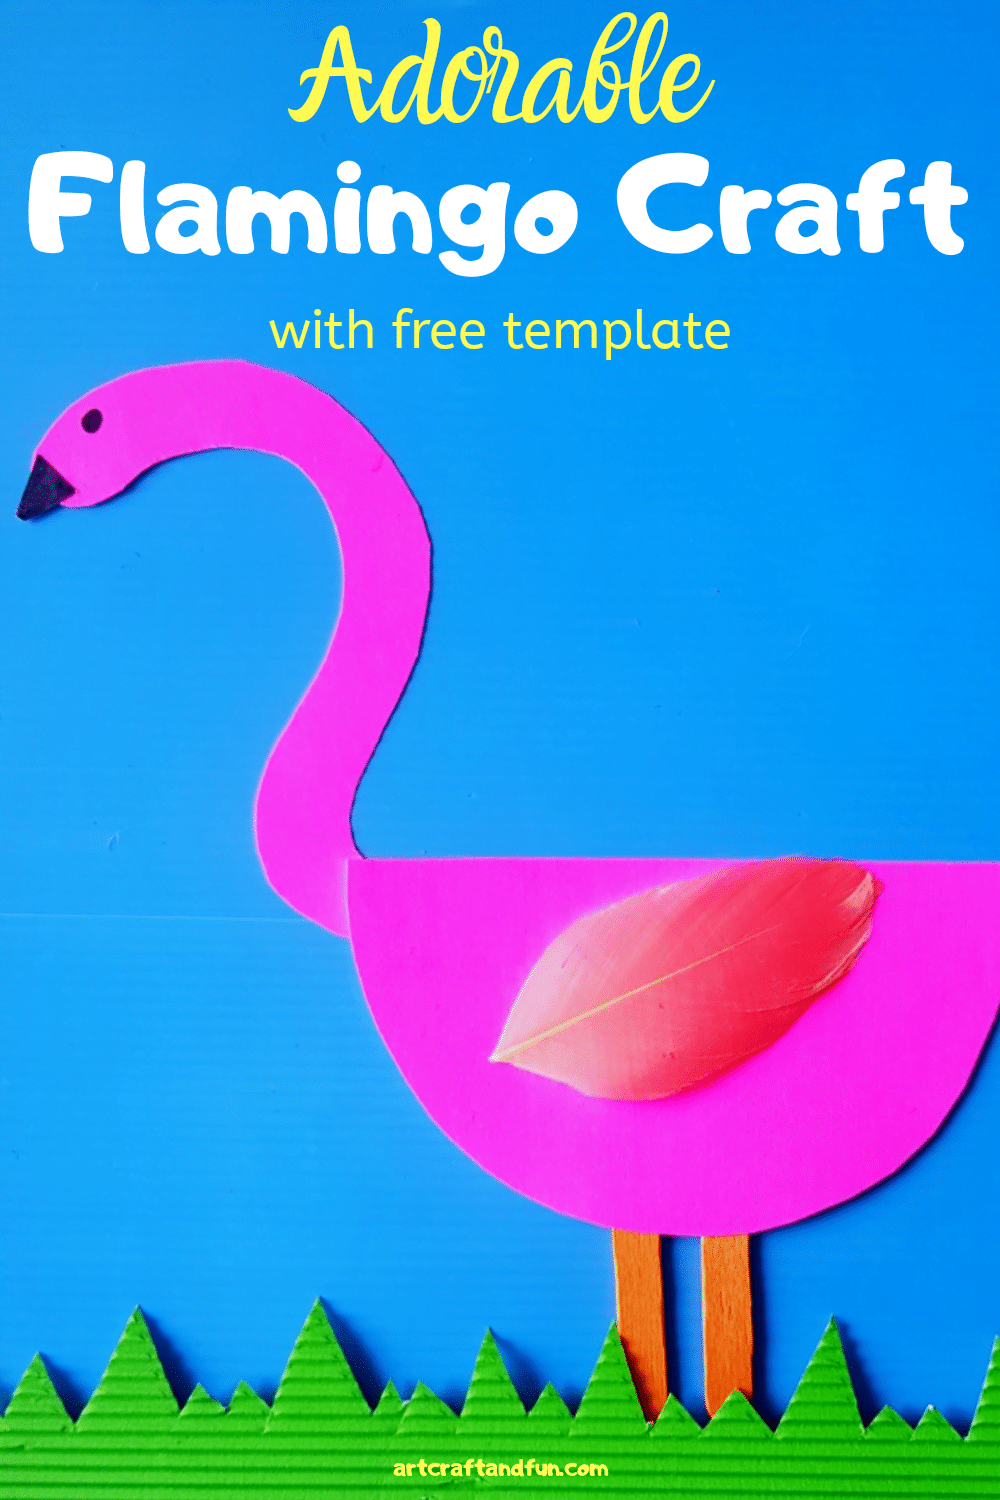 Learn to make this Adorable Flamingo Craft today. It comes with FREE Printable Template. This is a perfect preschool craft to make for the Rainforest theme. #Flamingocraft #paperflamingo #Flamingotemplate #Birdcraft #preschoolcraft #printablecraft